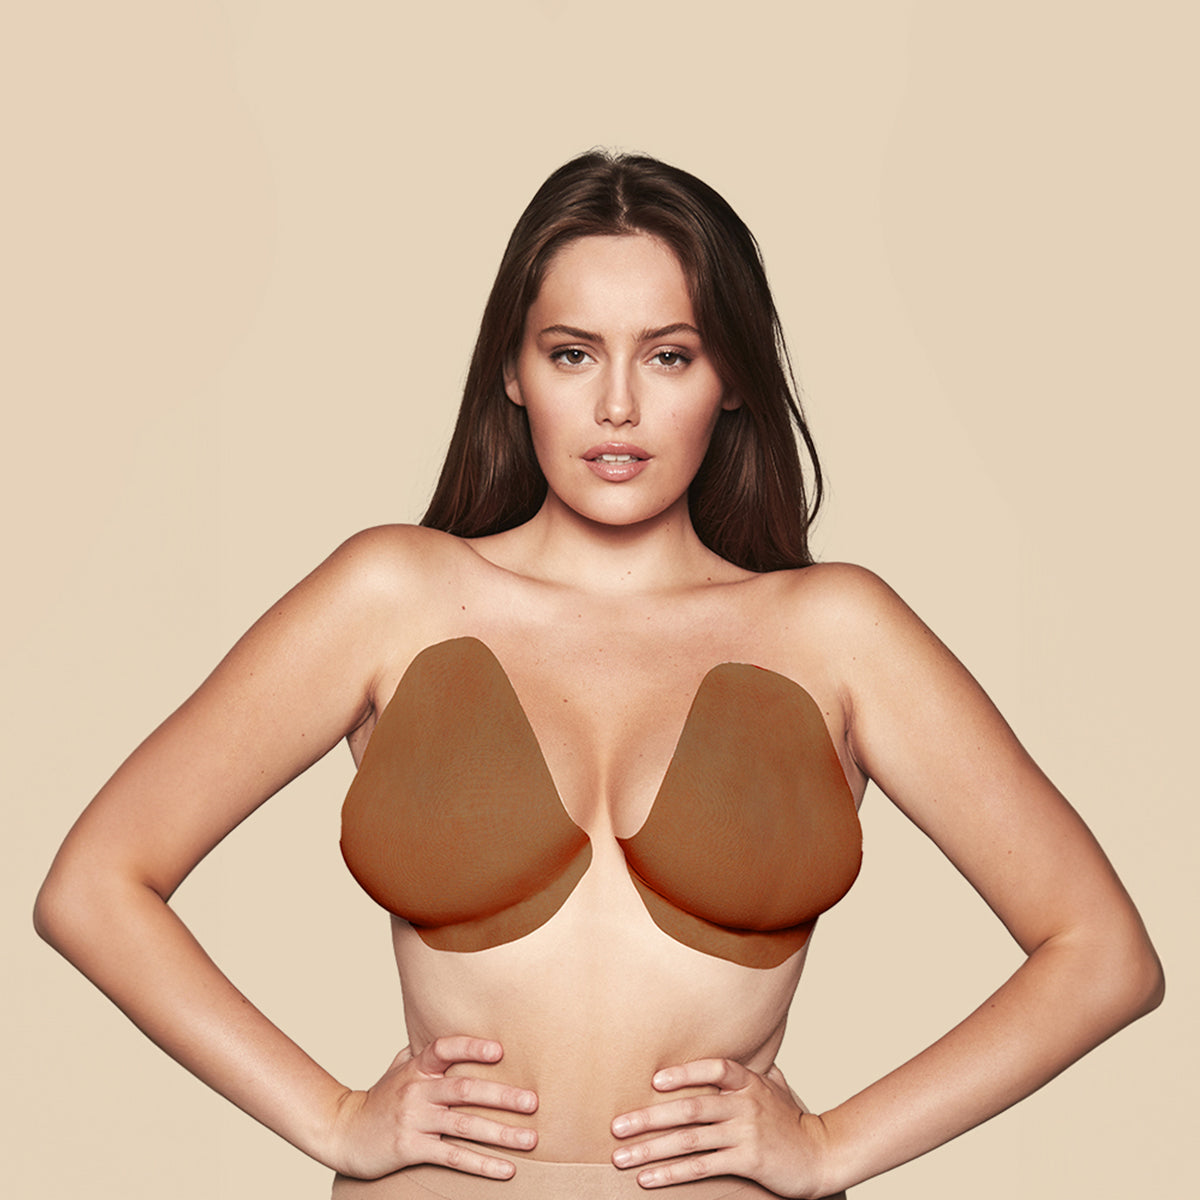 Invisible Backless & Strapless Adhesive Bra for All Sizes – Nood India